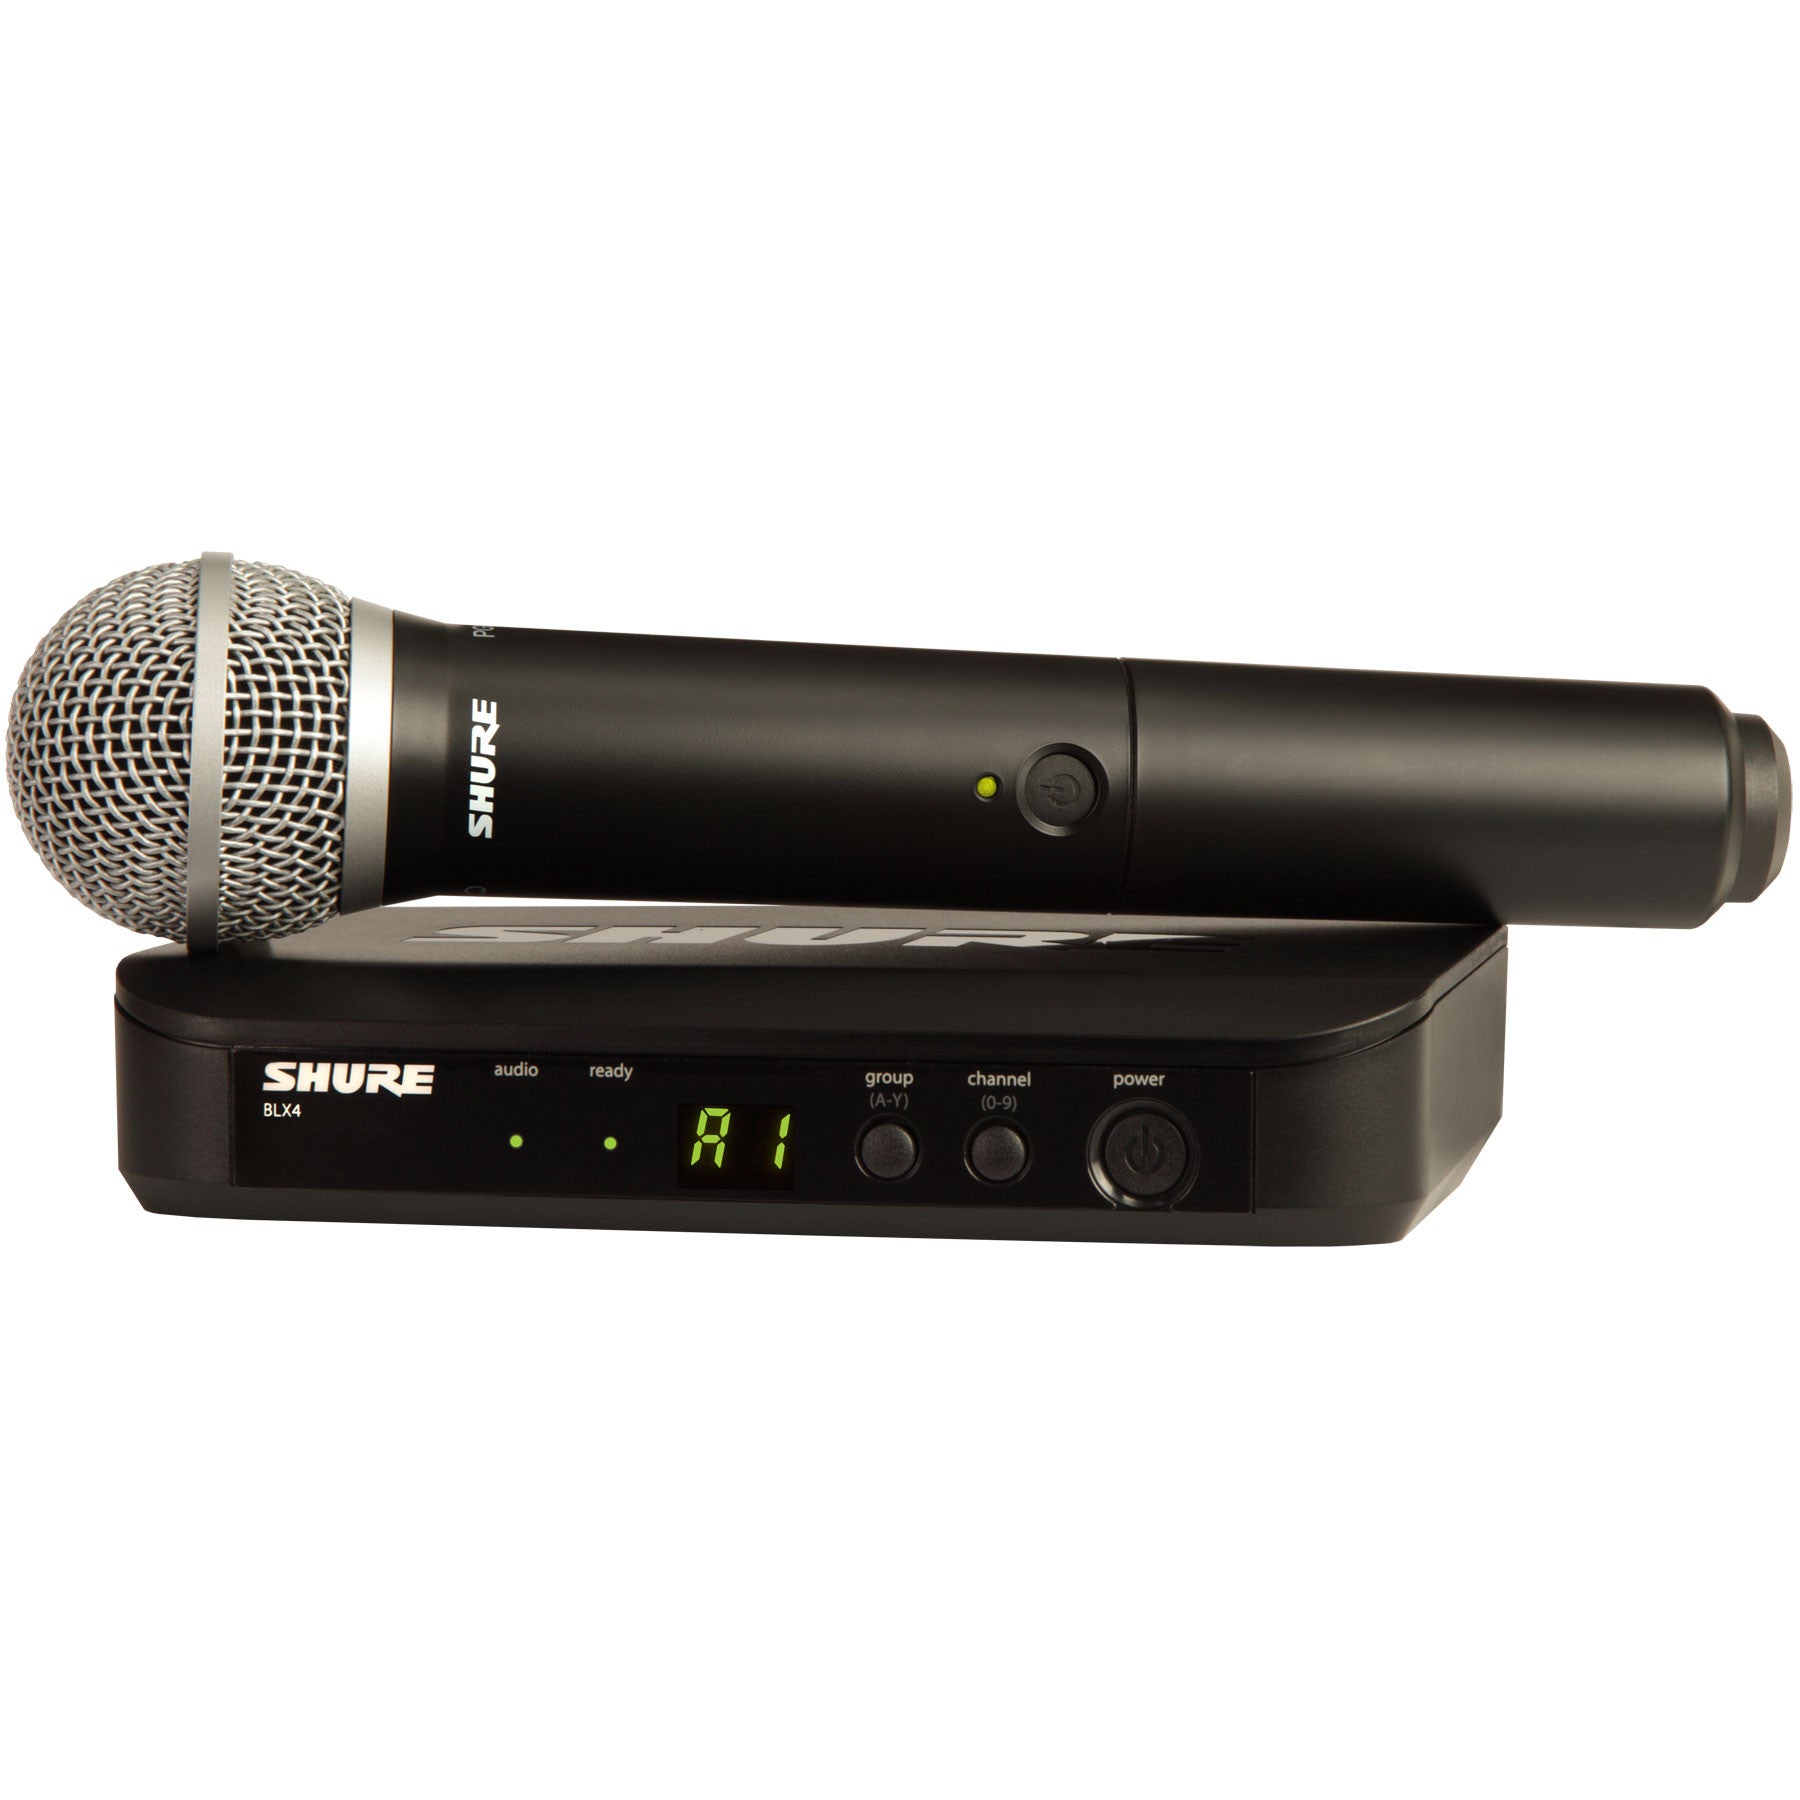 Shure Blx24/Pg58 Wireless Handheld Microphone System- J11 Band (596-608 + 614-616 Mhz)